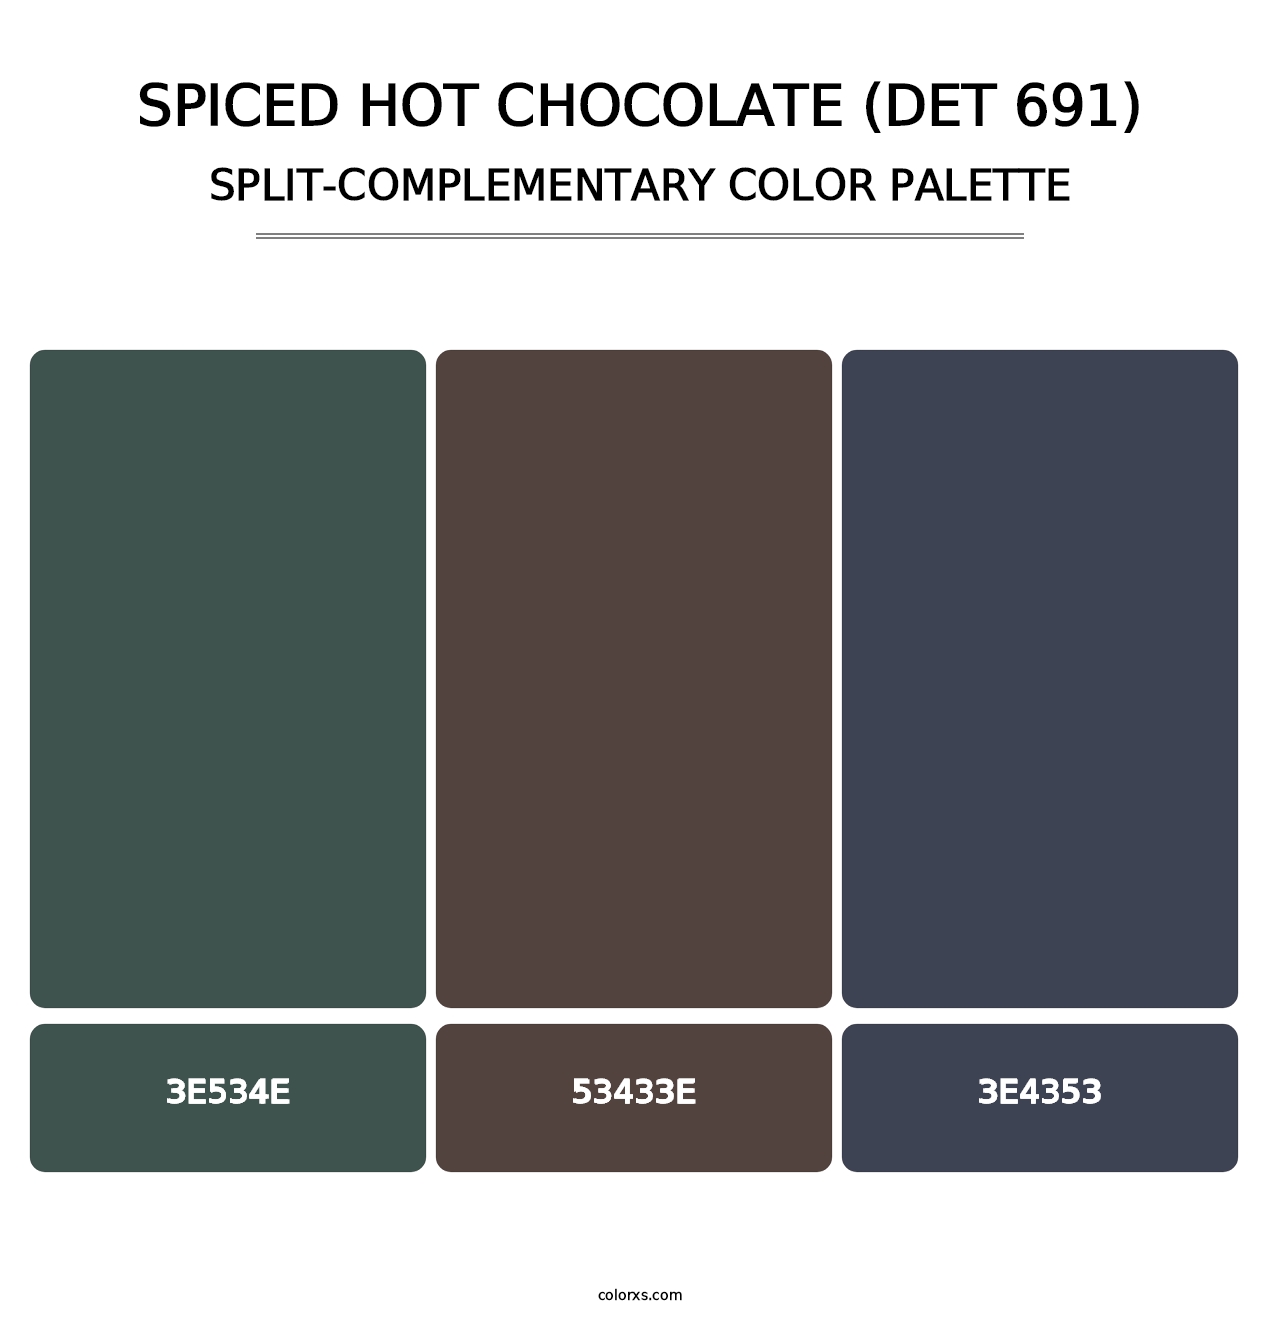 Spiced Hot Chocolate (DET 691) - Split-Complementary Color Palette